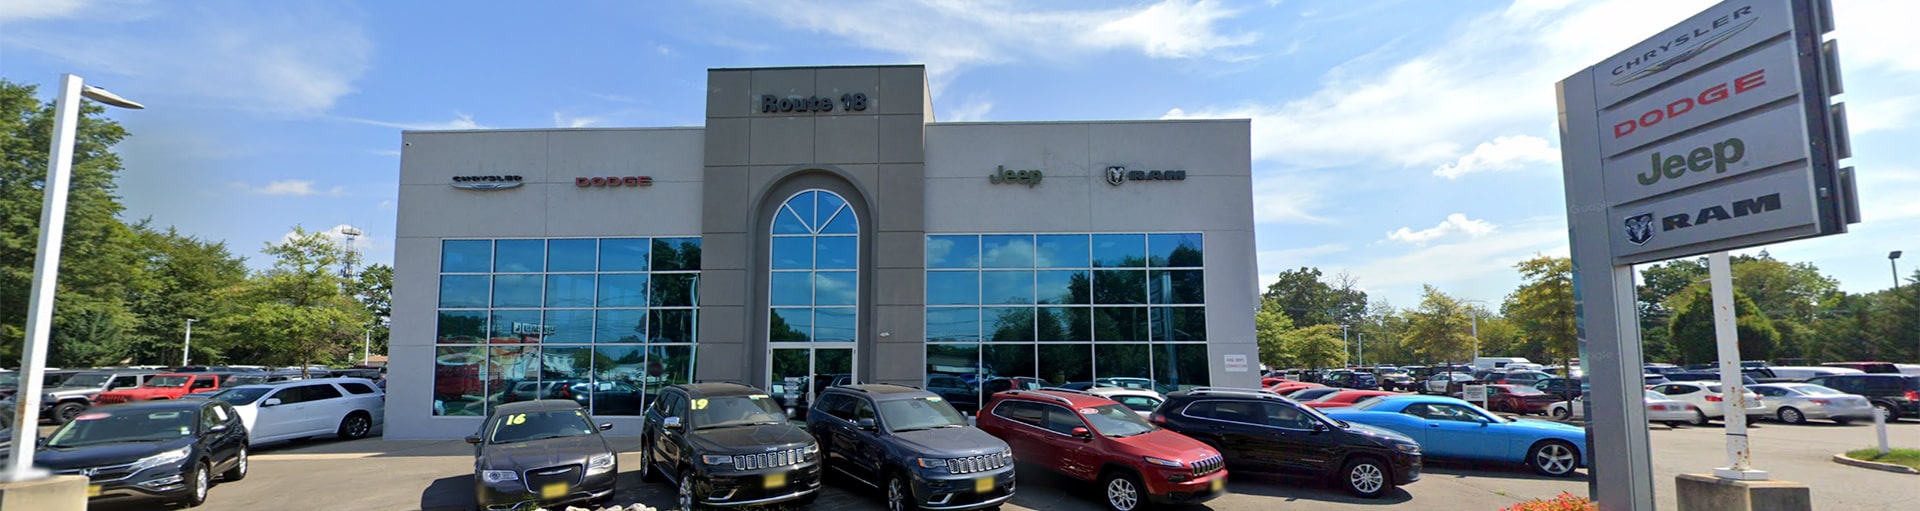 Route 18 Chrysler Dodge Jeep Ram Spend and Save on Service